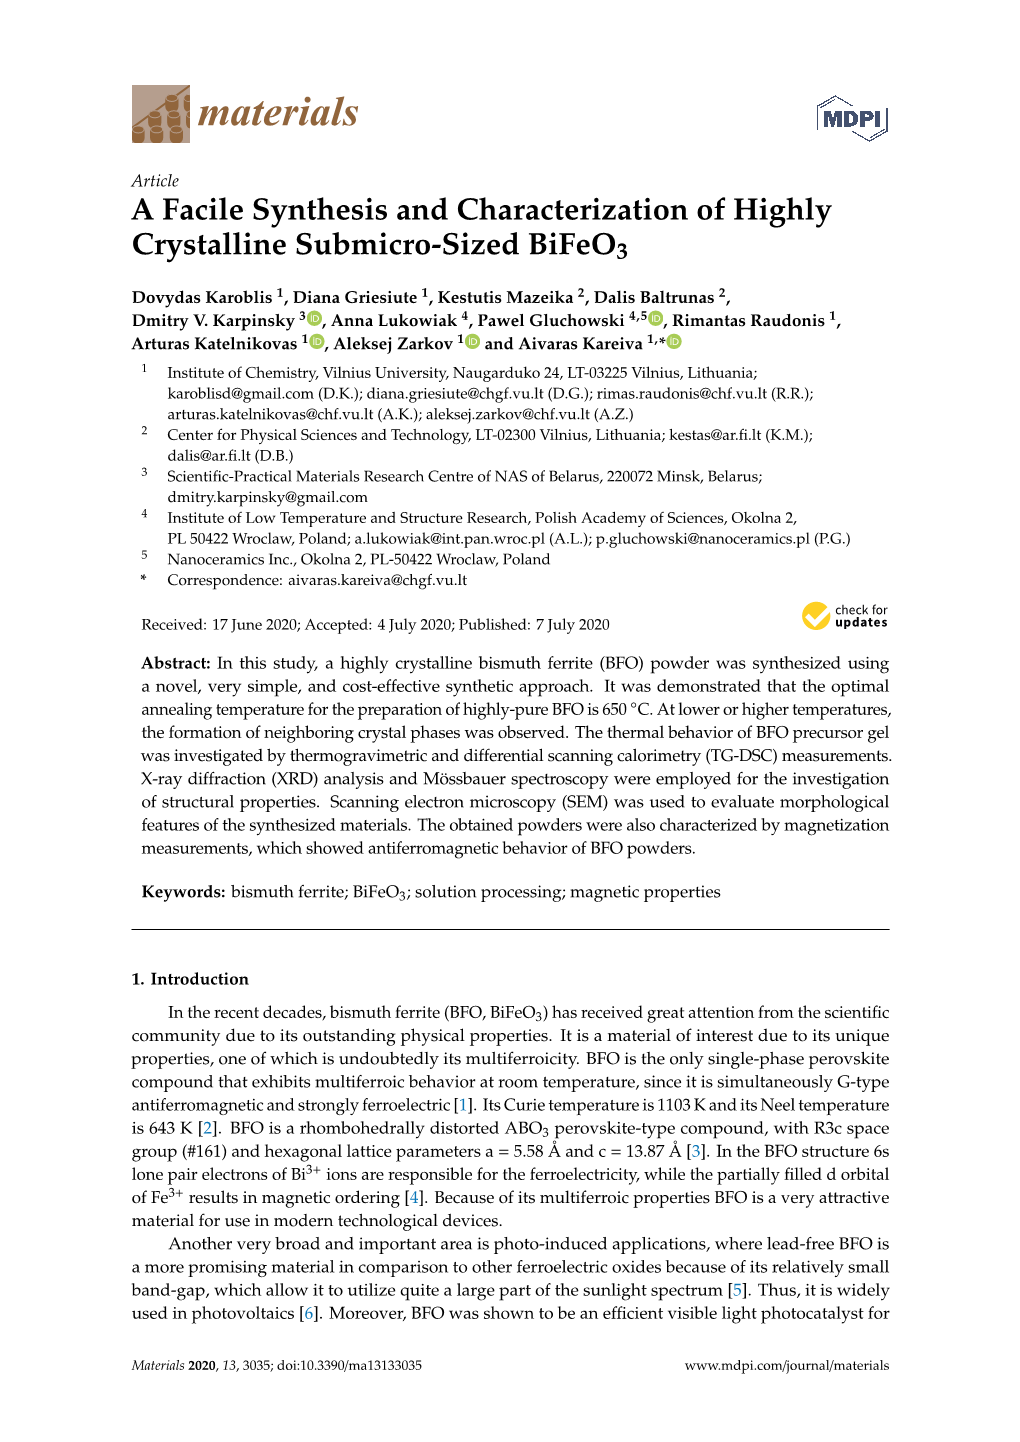 A Facile Synthesis and Characterization of Highly Crystalline Submicro-Sized Bifeo3